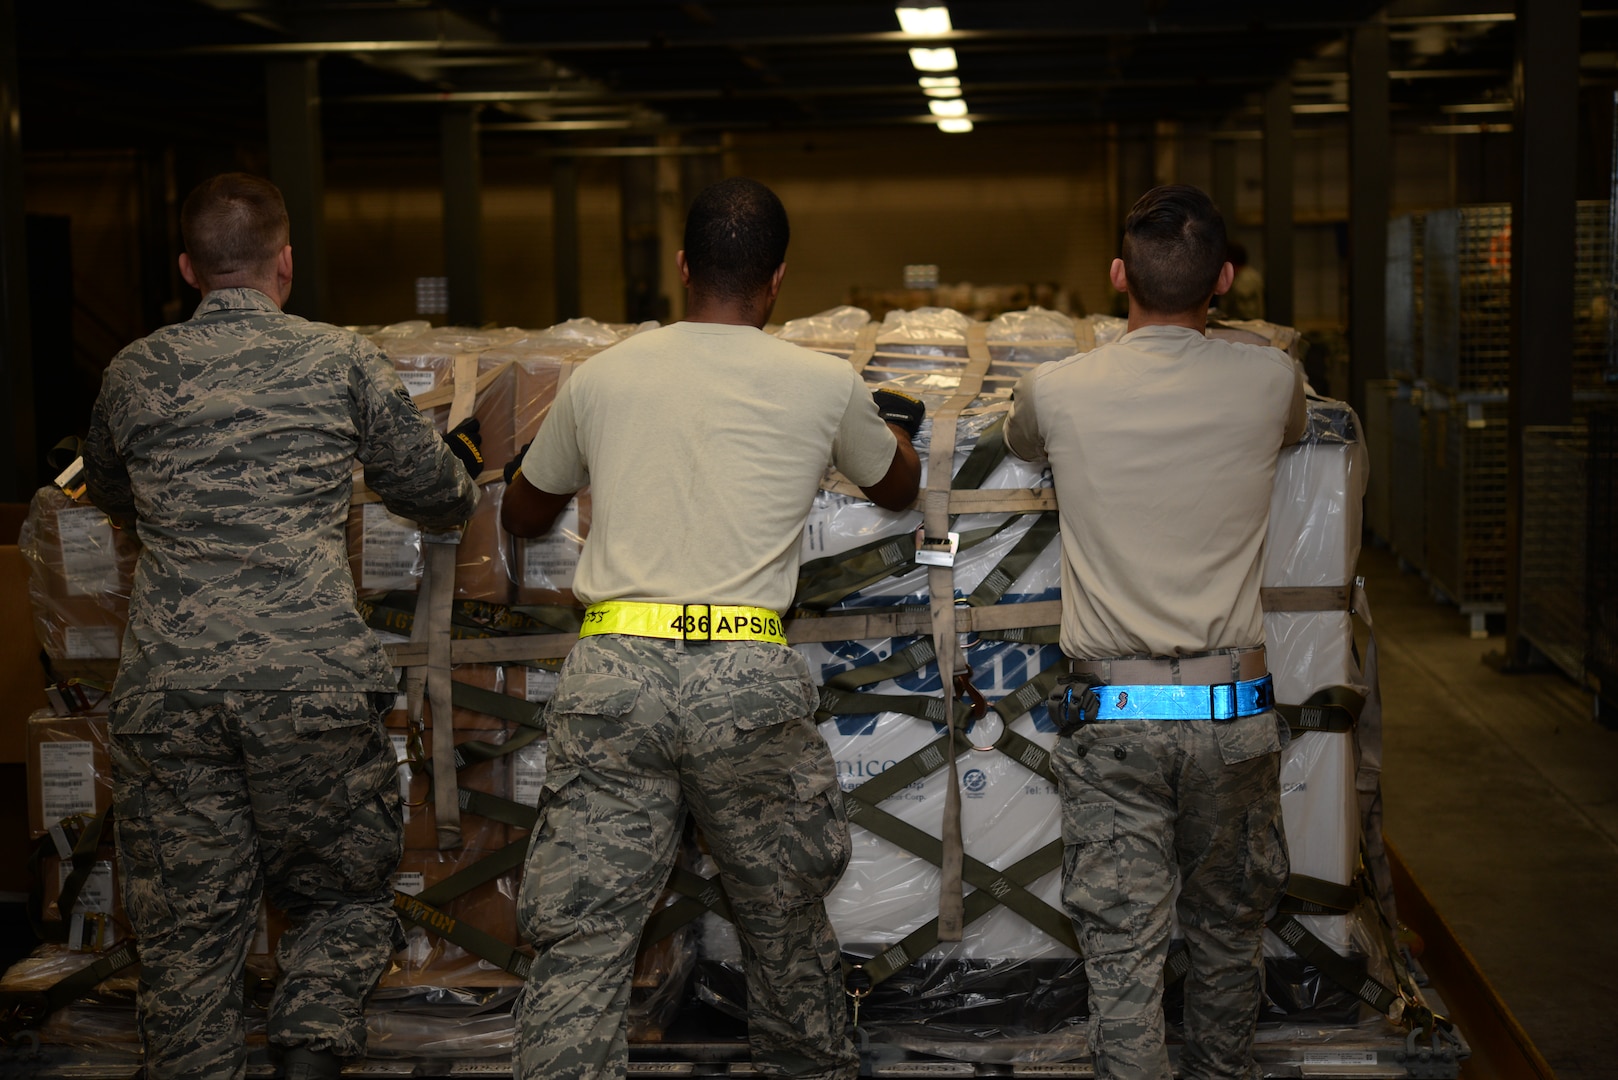 Members of the 436th Aerial Port Squadron move a pallet of individual protective equipment during a Civil Reserve Air Fleet readiness exercise Nov. 13, 2017, at Dover Air Force Base, Del. Members of the 436th LRS worked hand-in-hand with members of the 436th APS to prepare the IPE for flight. (U.S. Air Force photo by Staff Sgt. Aaron J. Jenne)